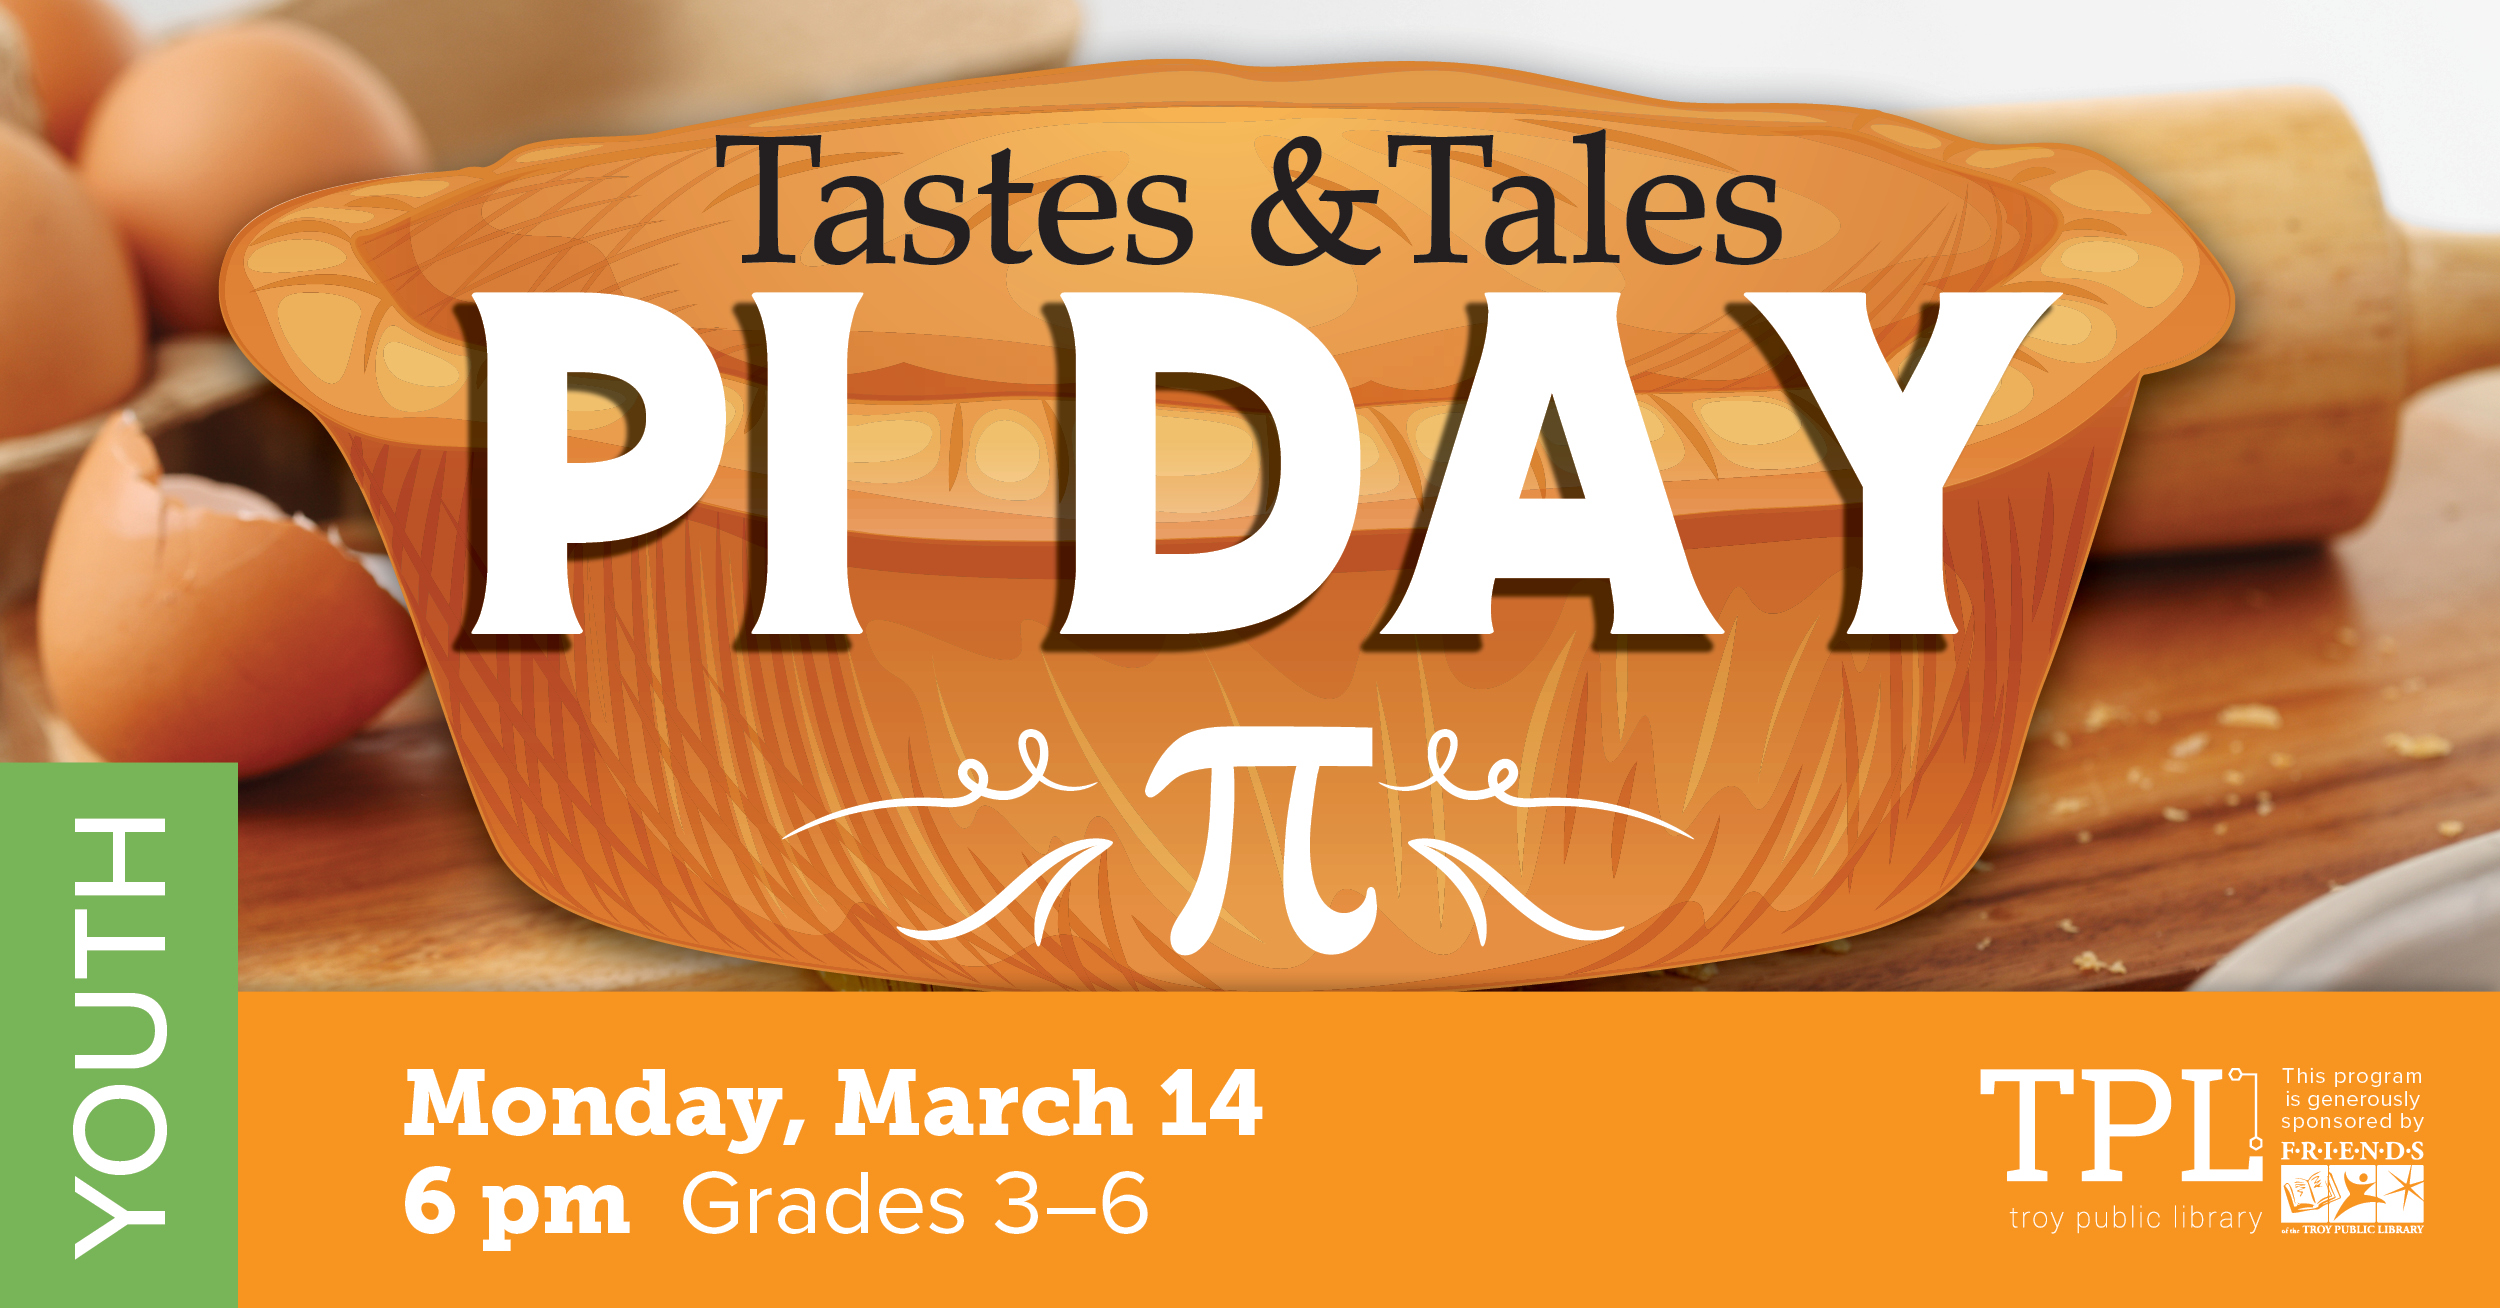 Tastes & Tales: Pie Day Monday, March 14 at 6pm. Grades 3-6. Sponsored by the Friends of the Troy Public Library